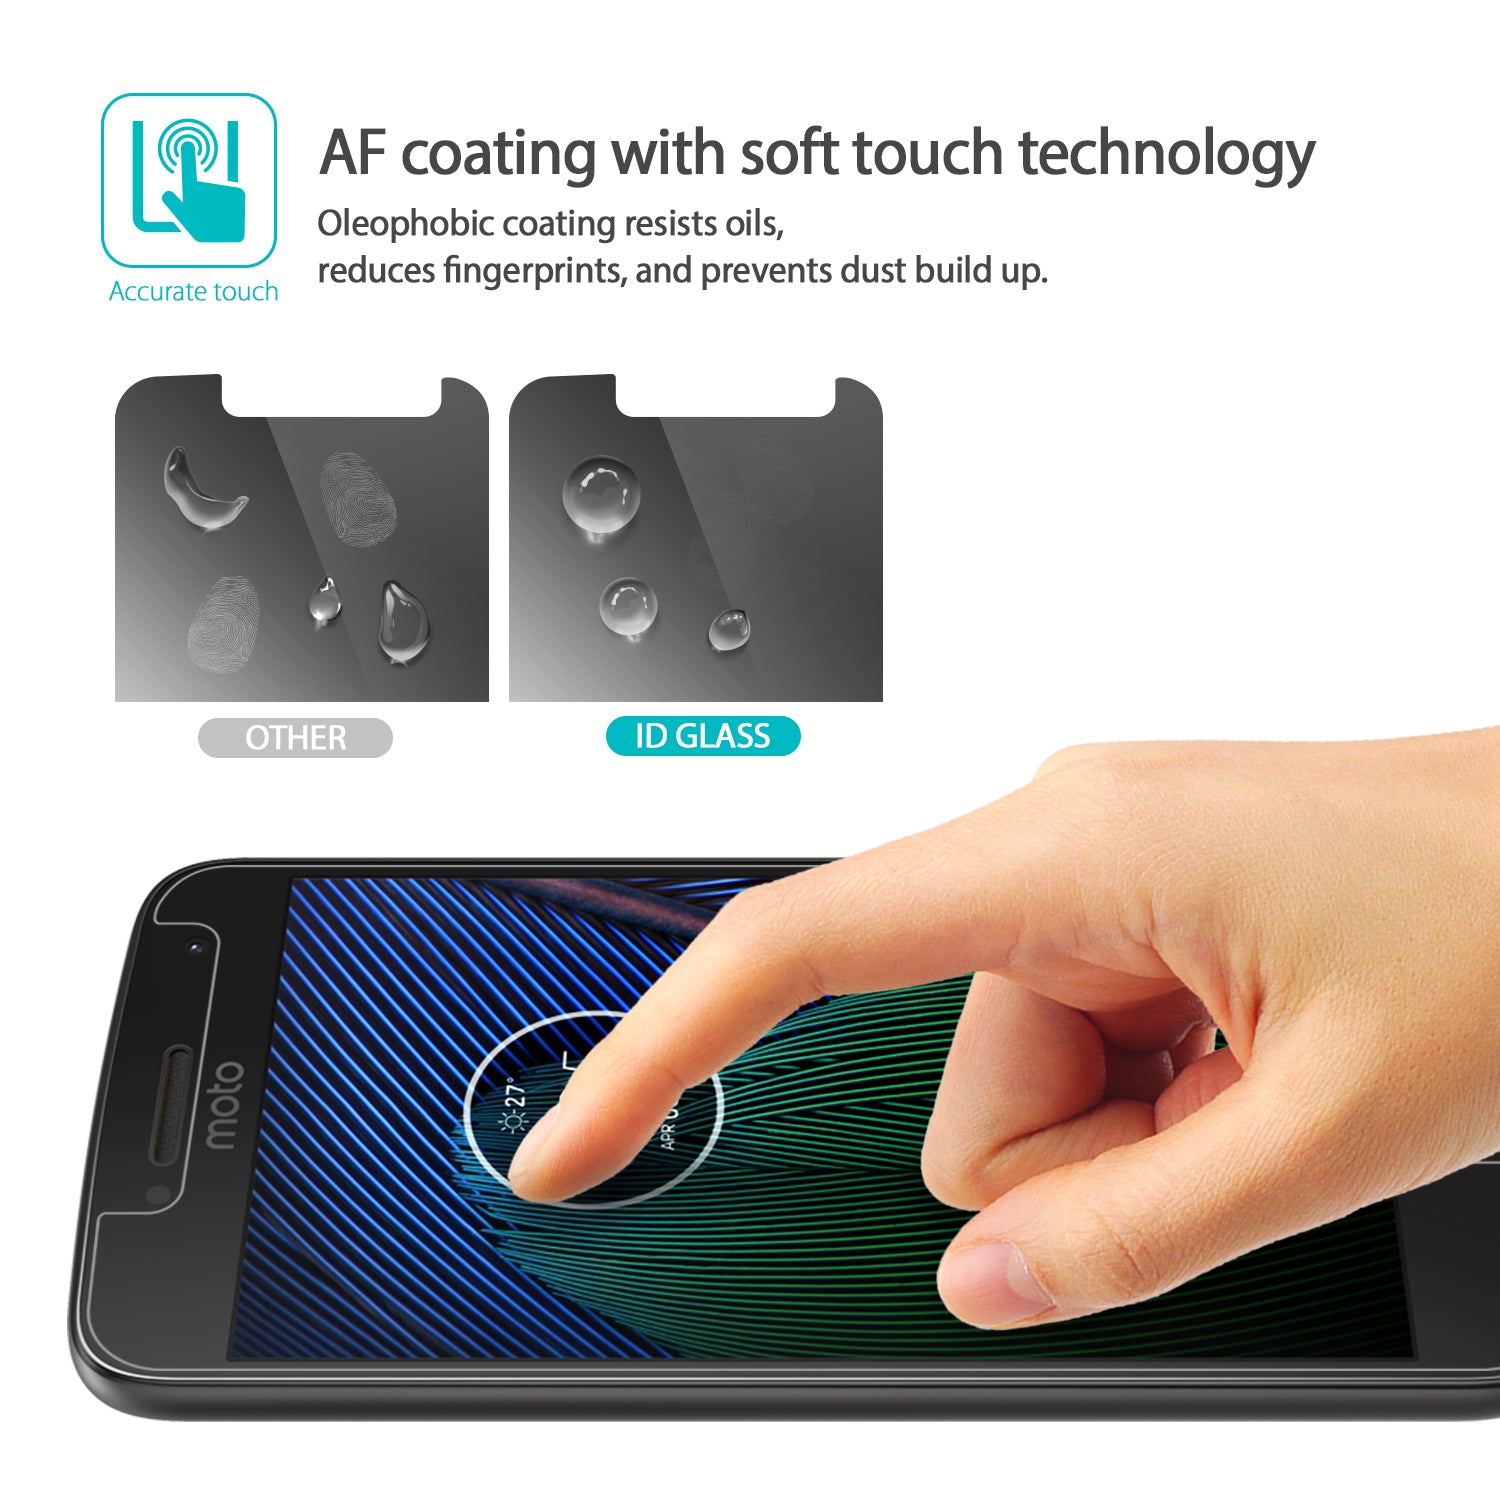 Moto G5 Plus Screen Protector | Invisible Defender Glass [2P] - AF Coating with soft touch technology